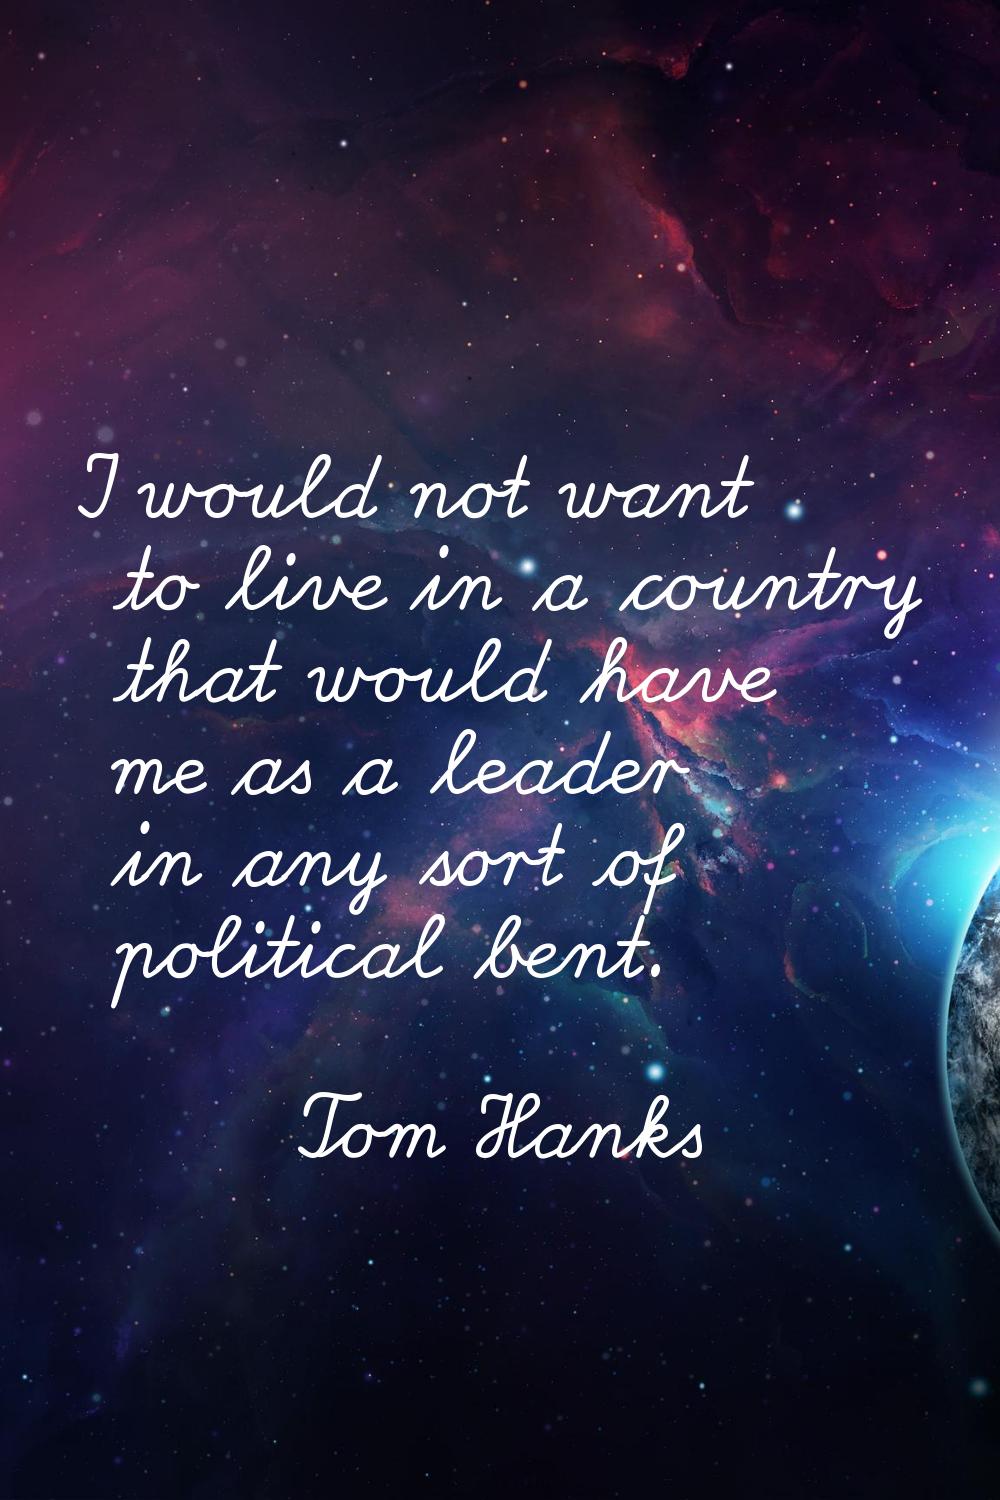 I would not want to live in a country that would have me as a leader in any sort of political bent.